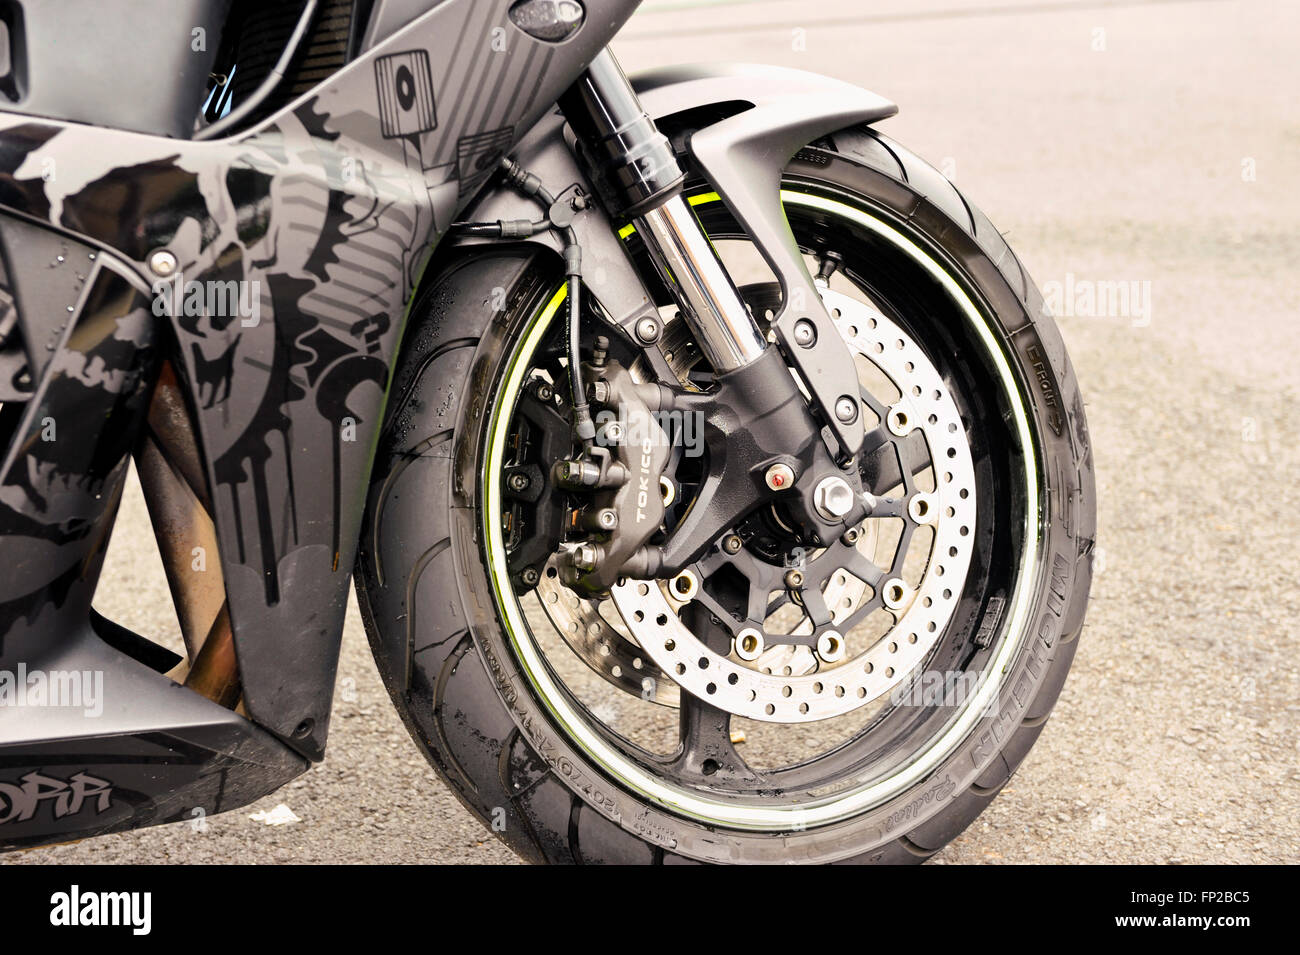 Front tire and disc brake system detail on a sport bike motorcycle Stock Photo